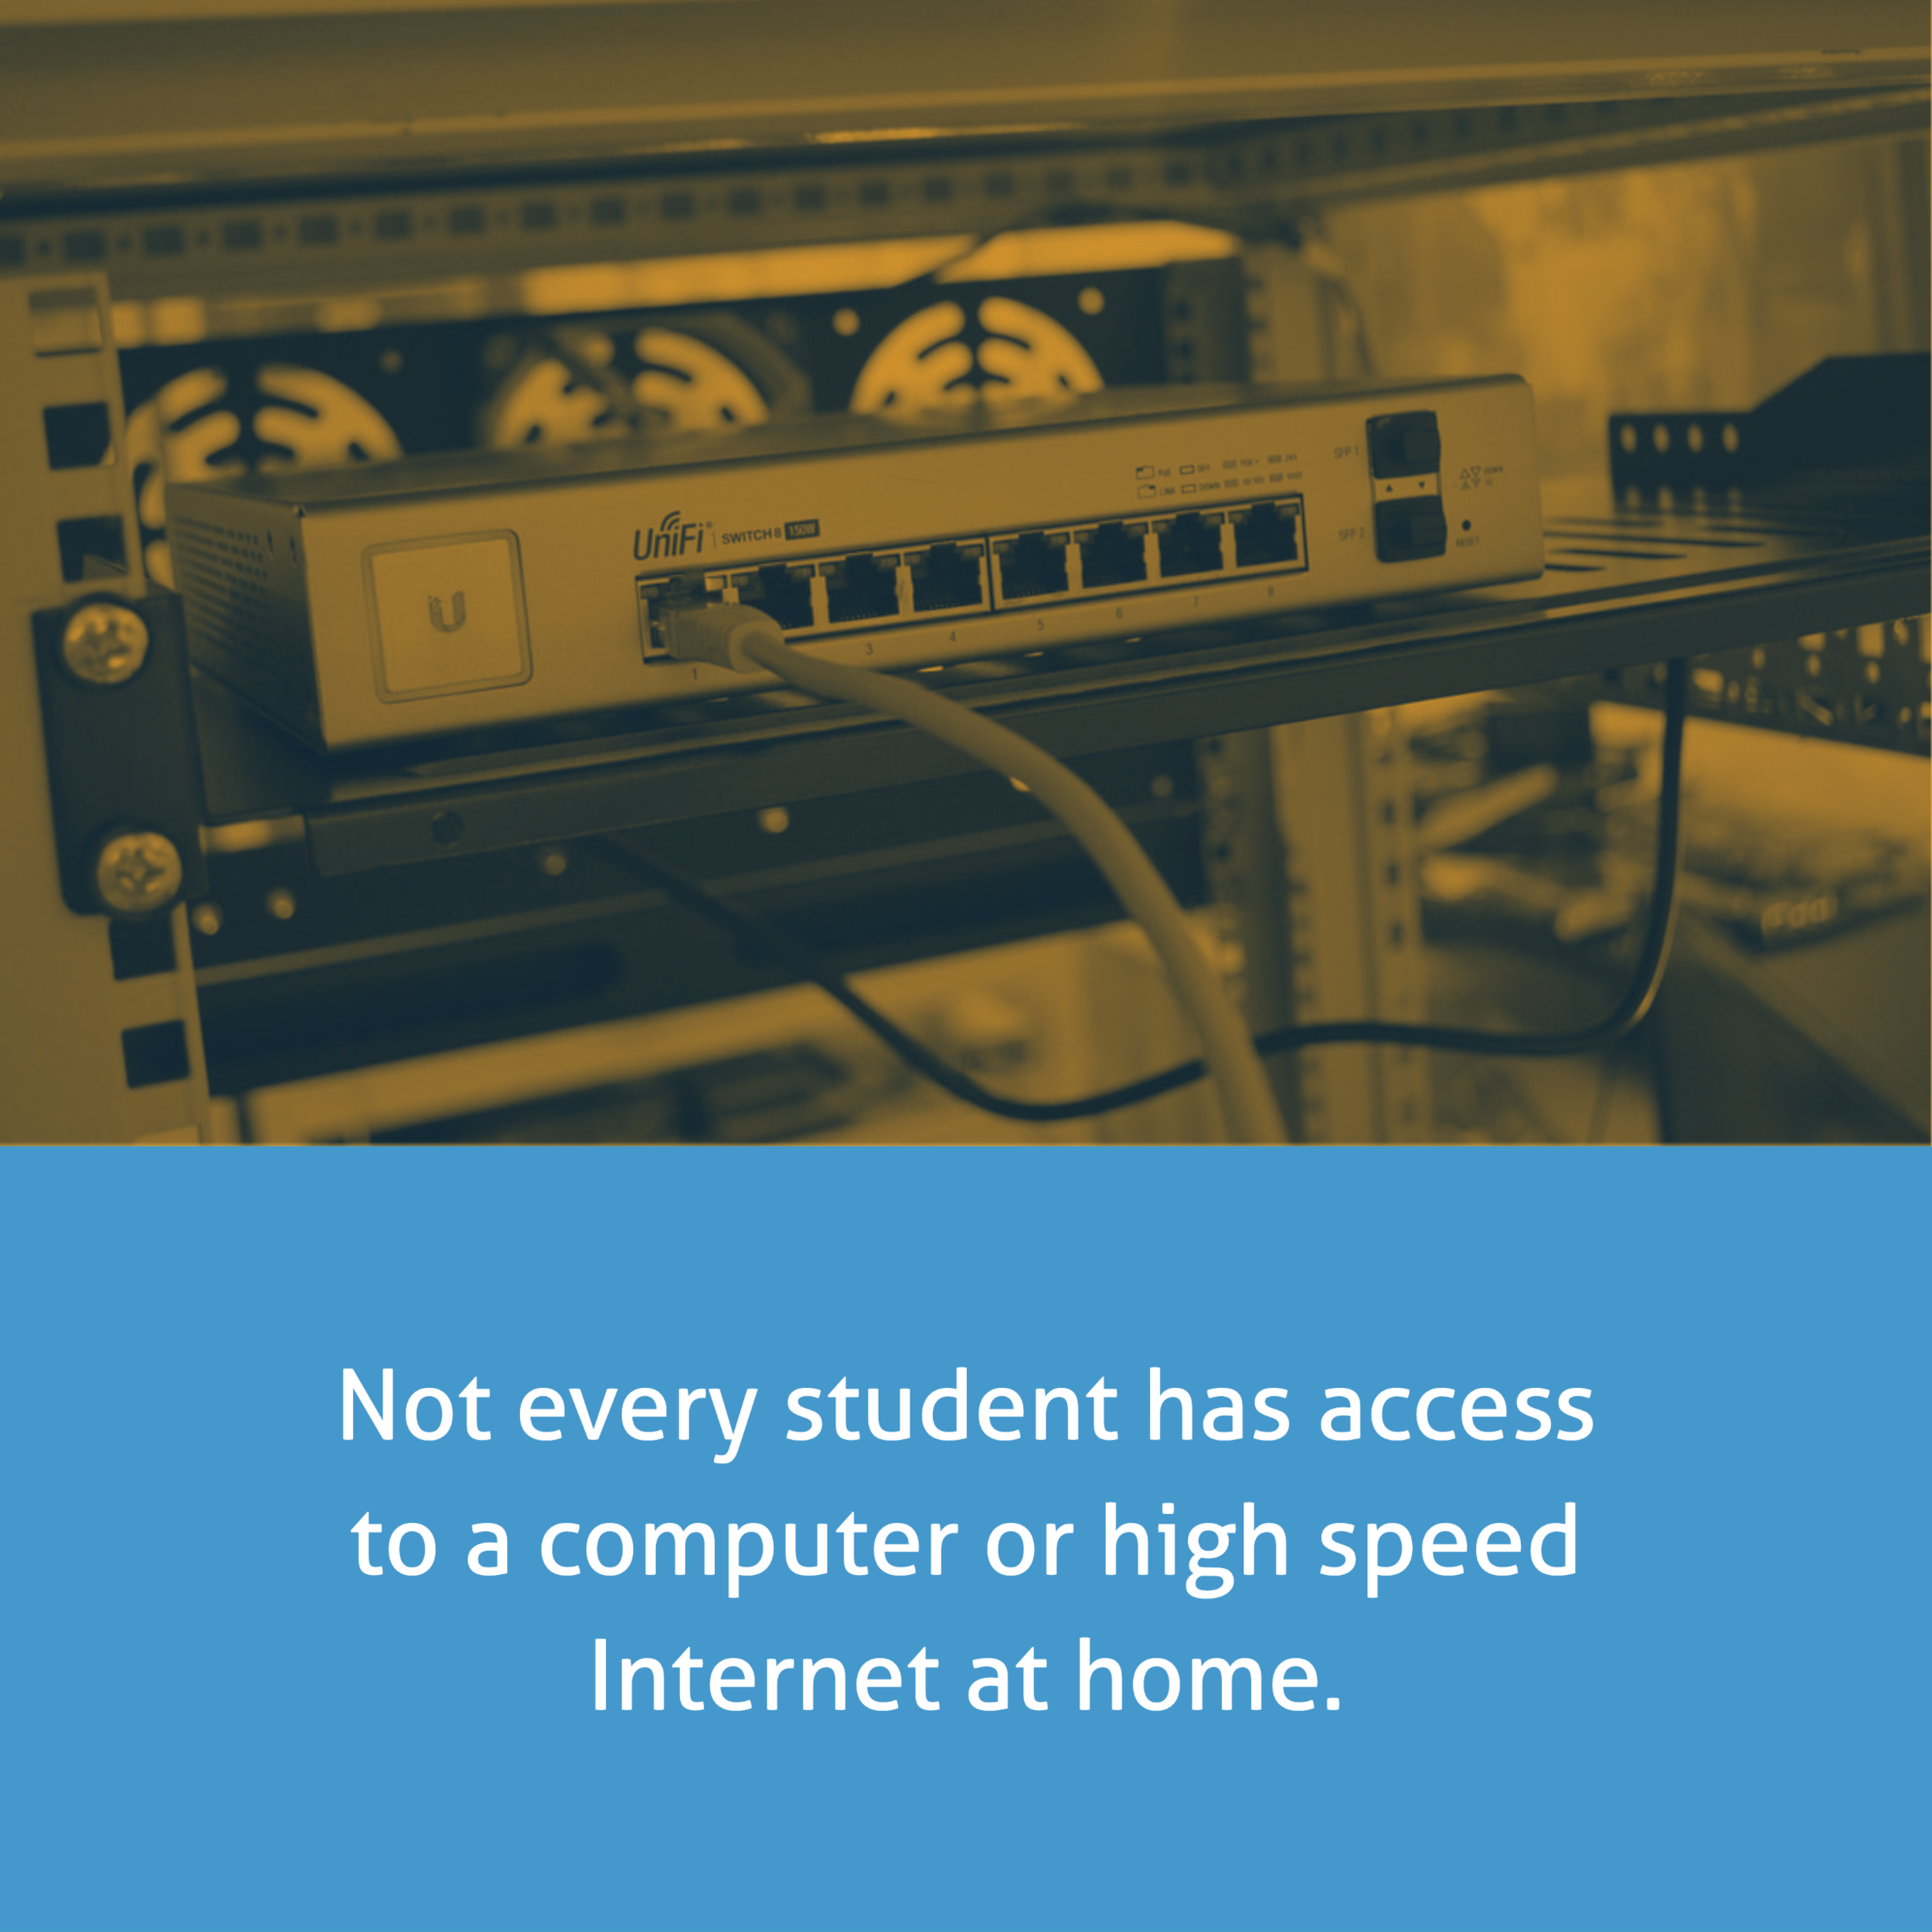 Not every student has access to a computer or high speed Internet at home.